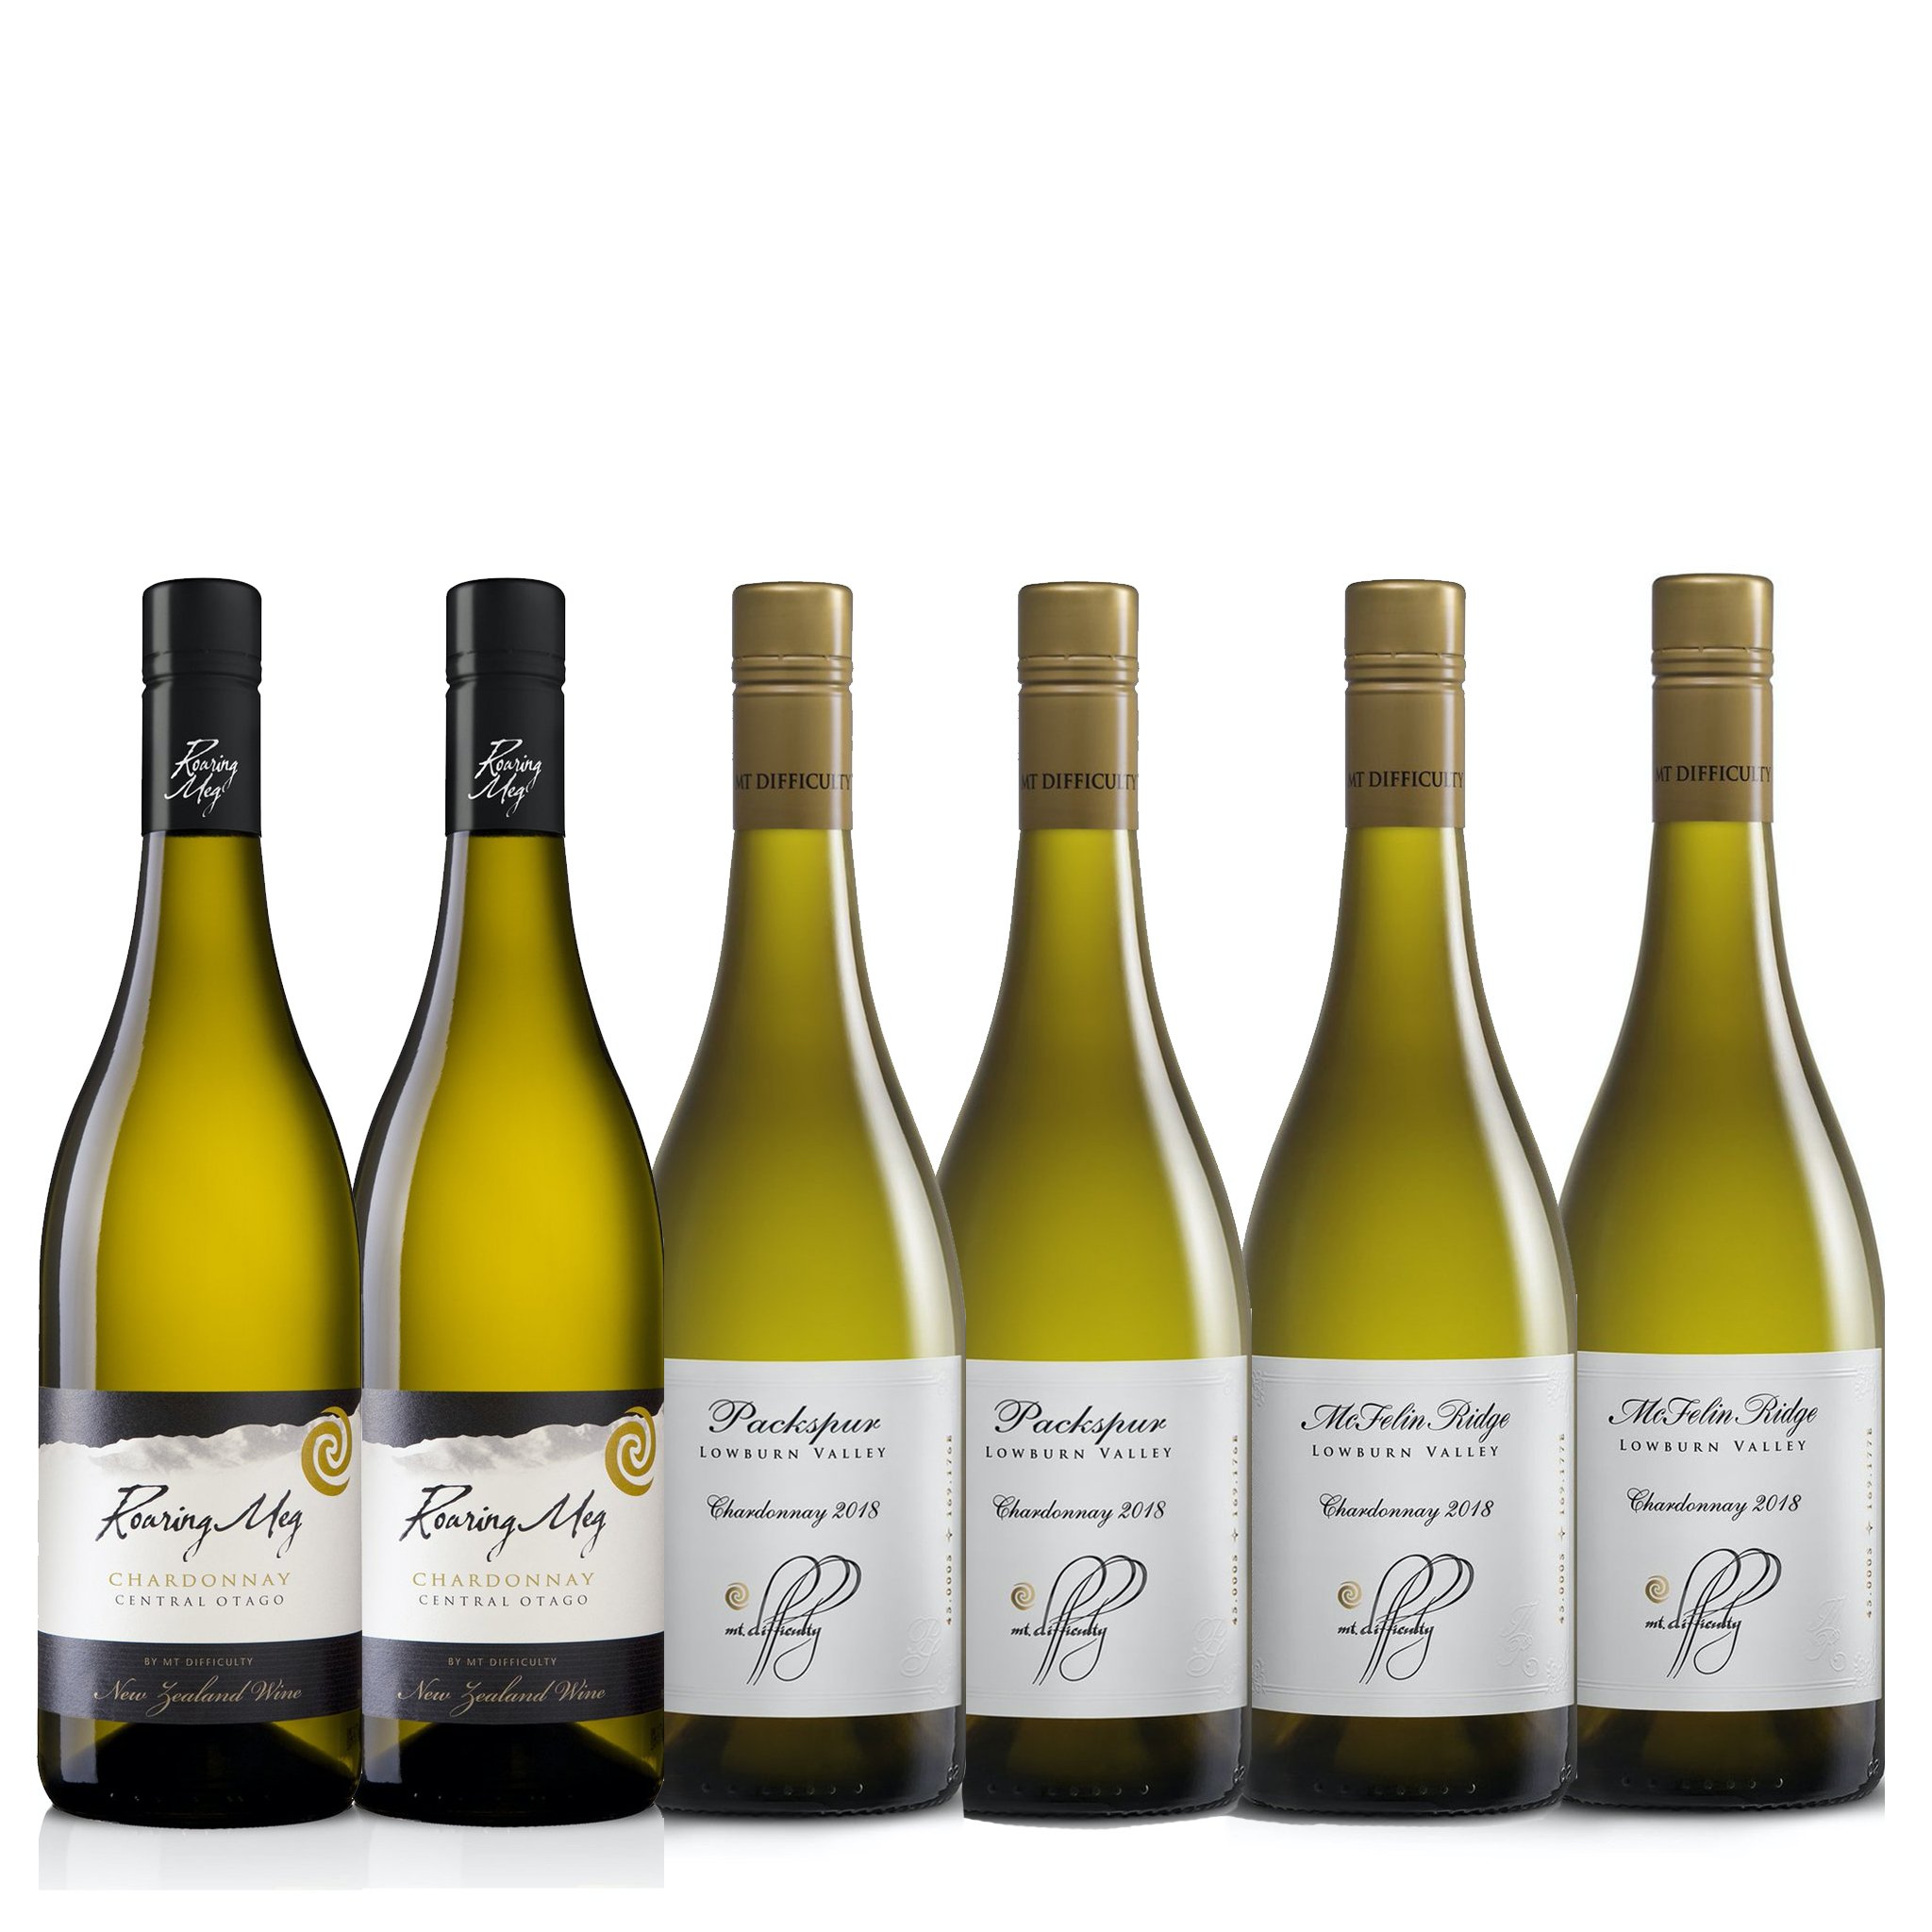 Mt Difficulty Chardonnay case 6 bottles in total